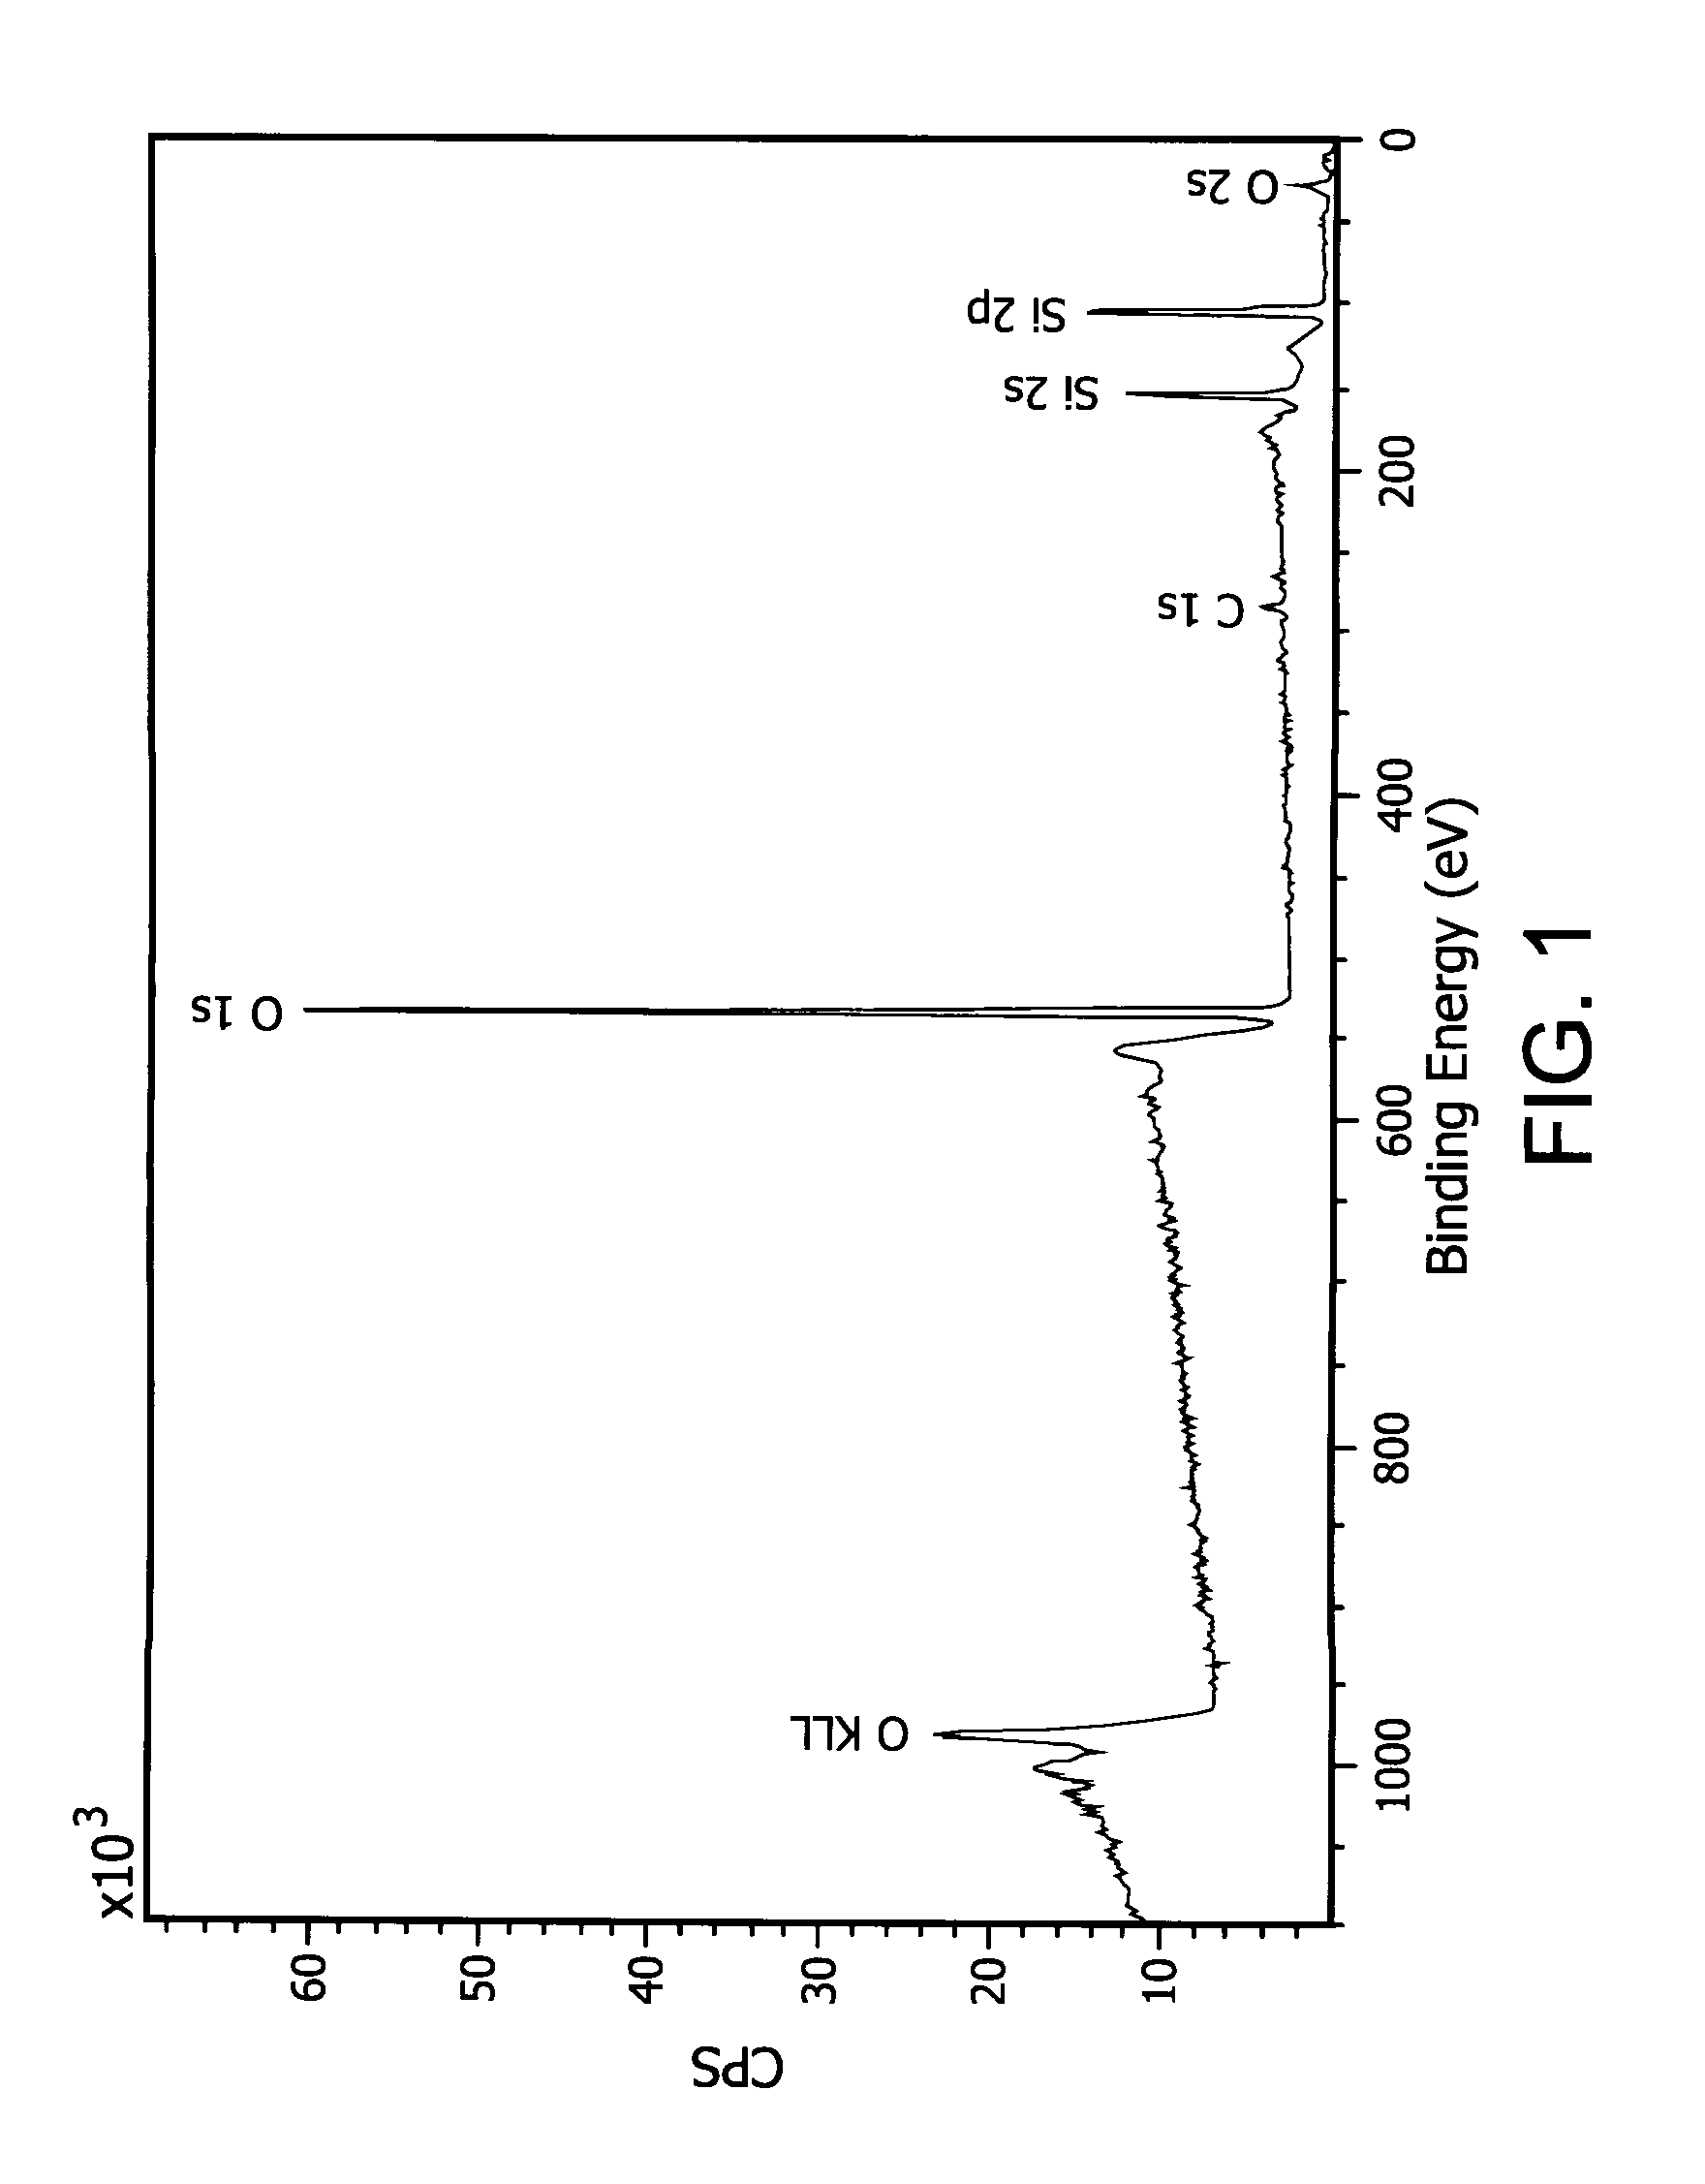 Methods to prepare silicon-containing films